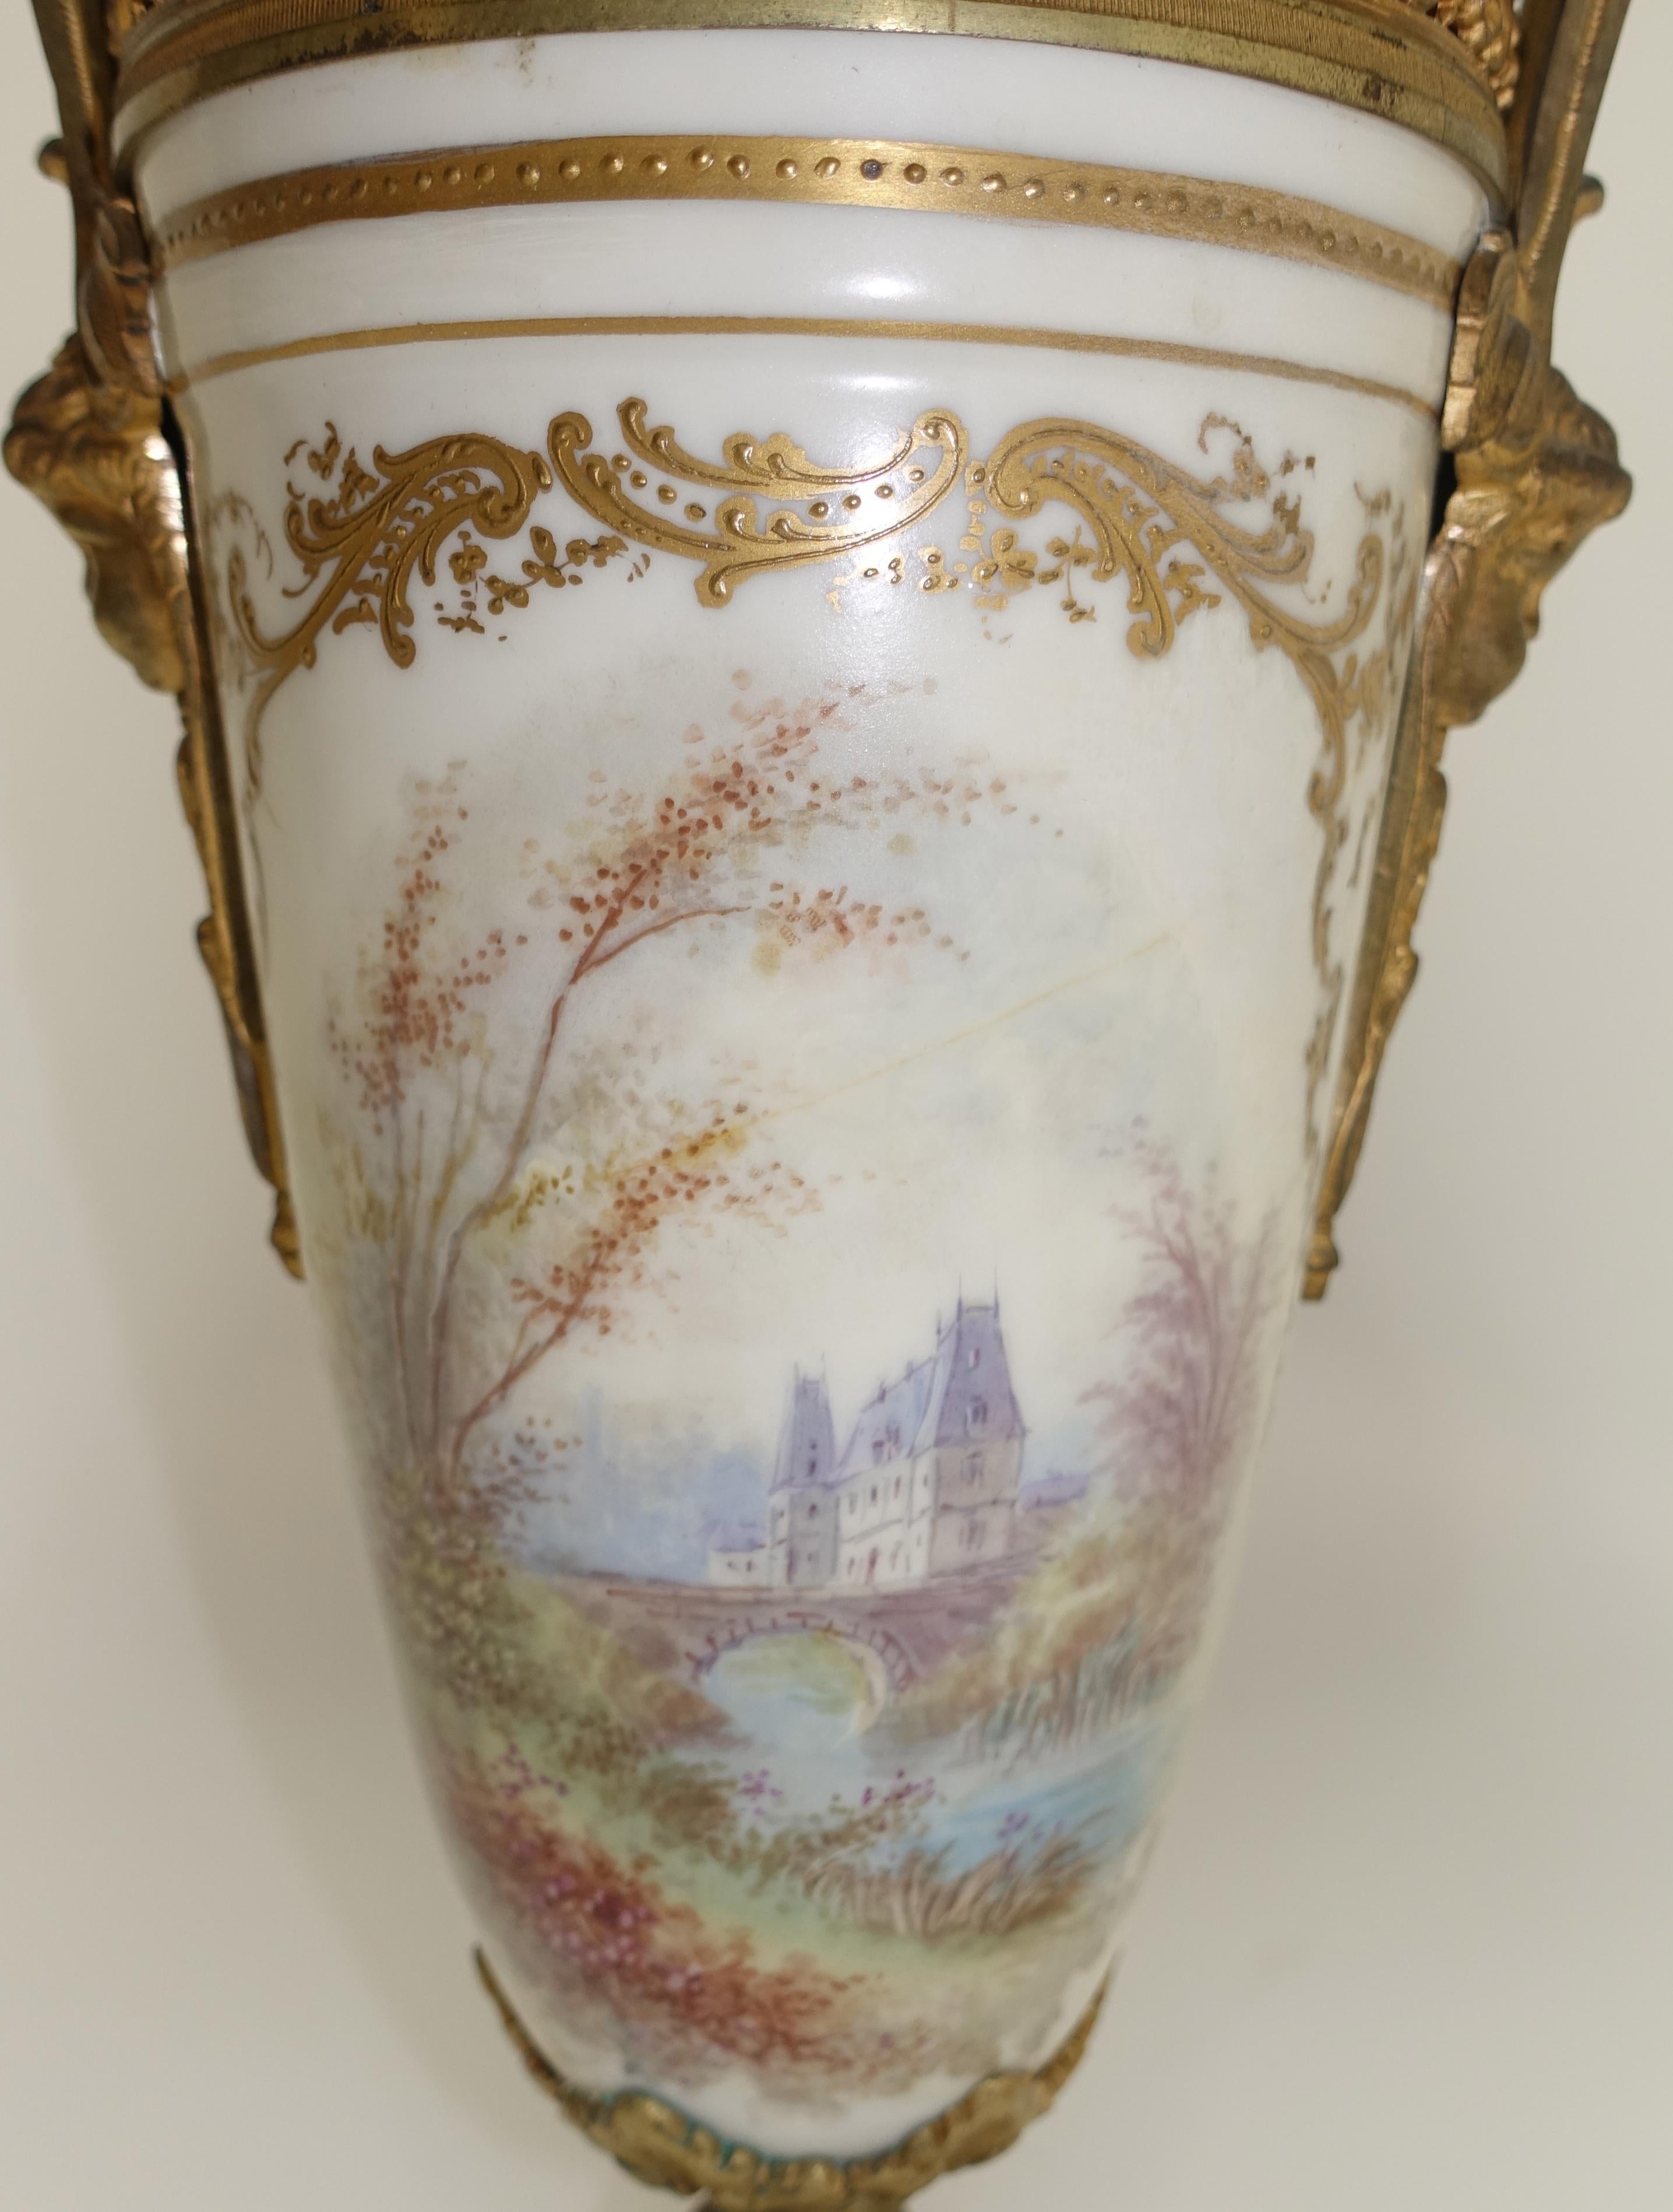 Painted 19th Century Sèvres Porcelain and Ormolu Covered Urn/Lamp